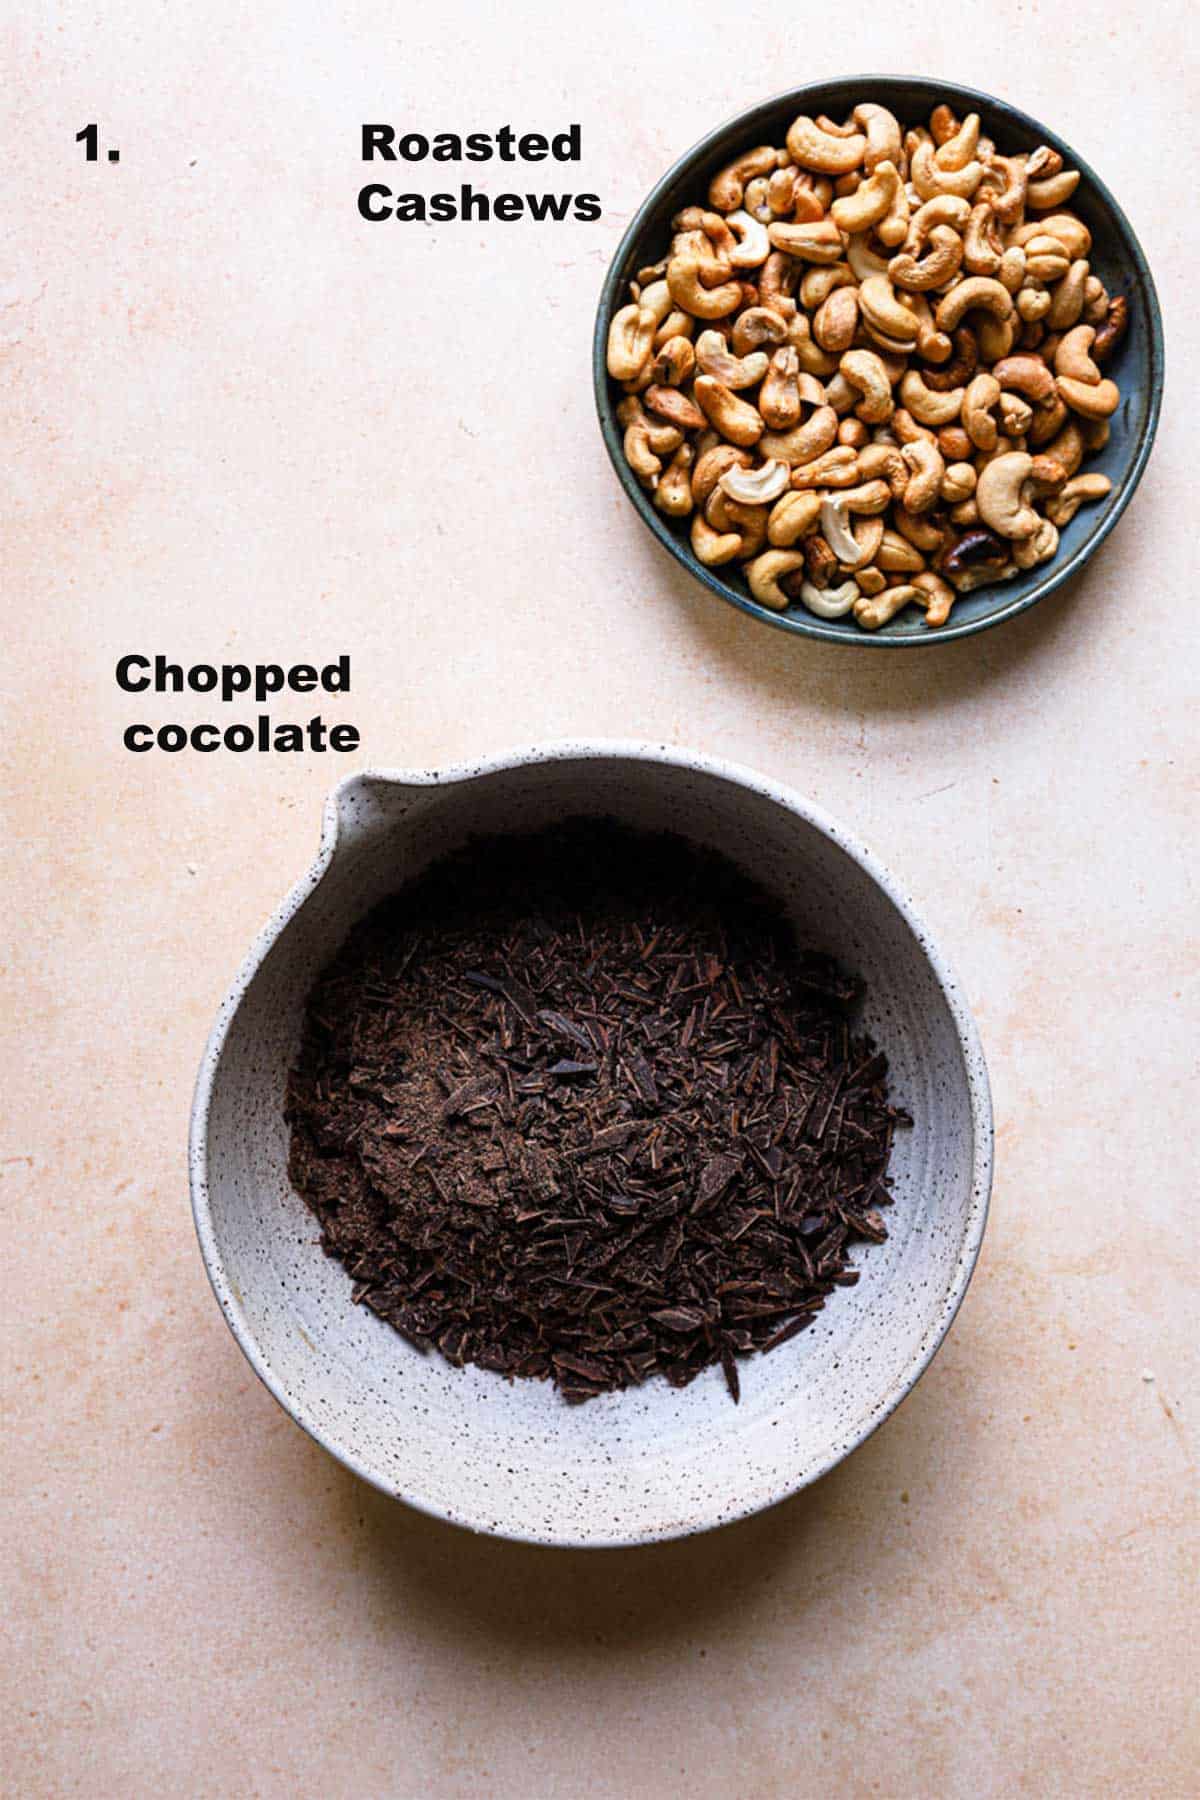 Roasted cashews and chopped chocolate in bowls